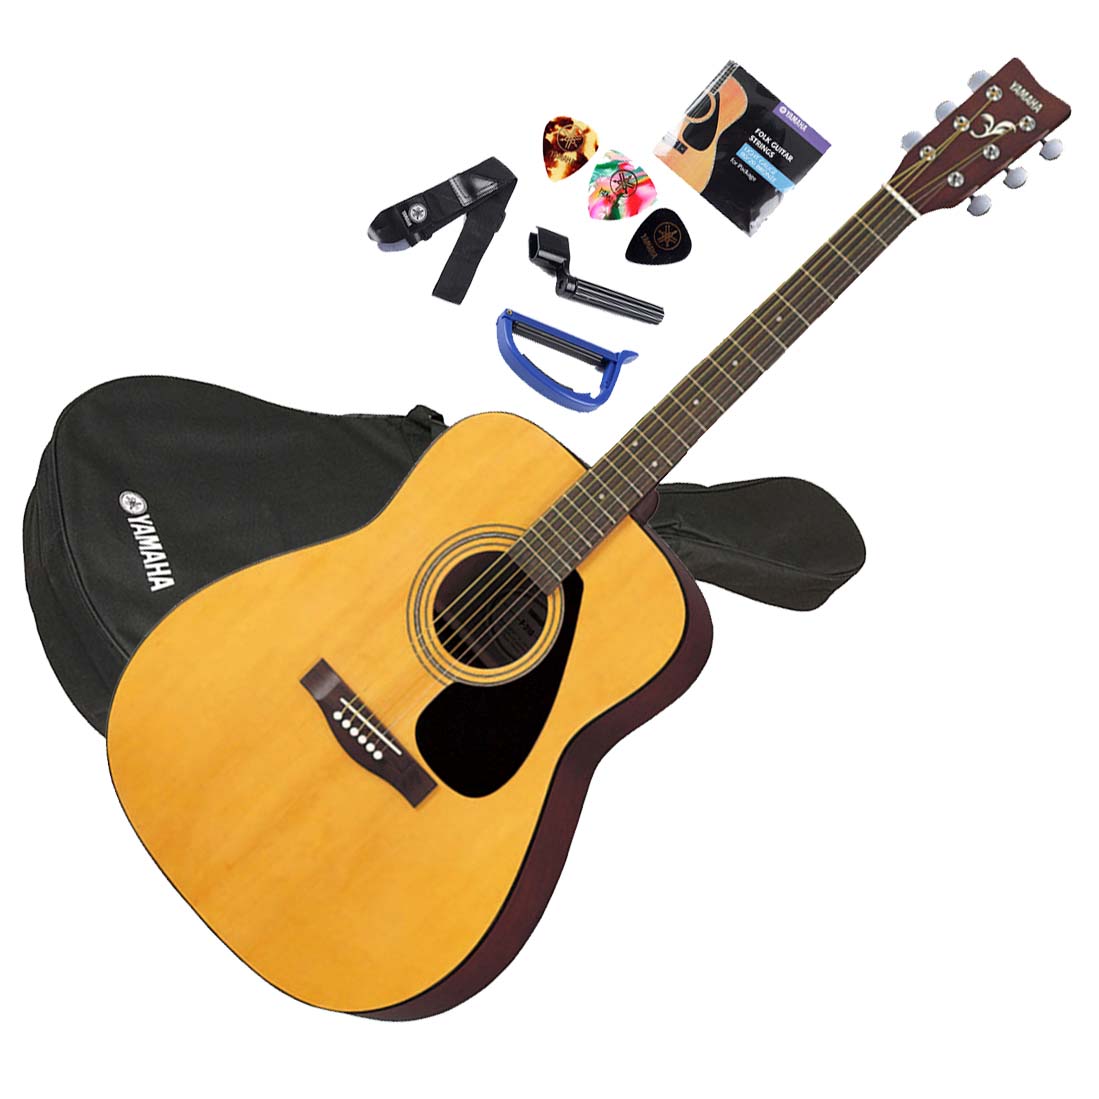 Yamaha F310p Acoustic Guitar Package, Natural | Music Works